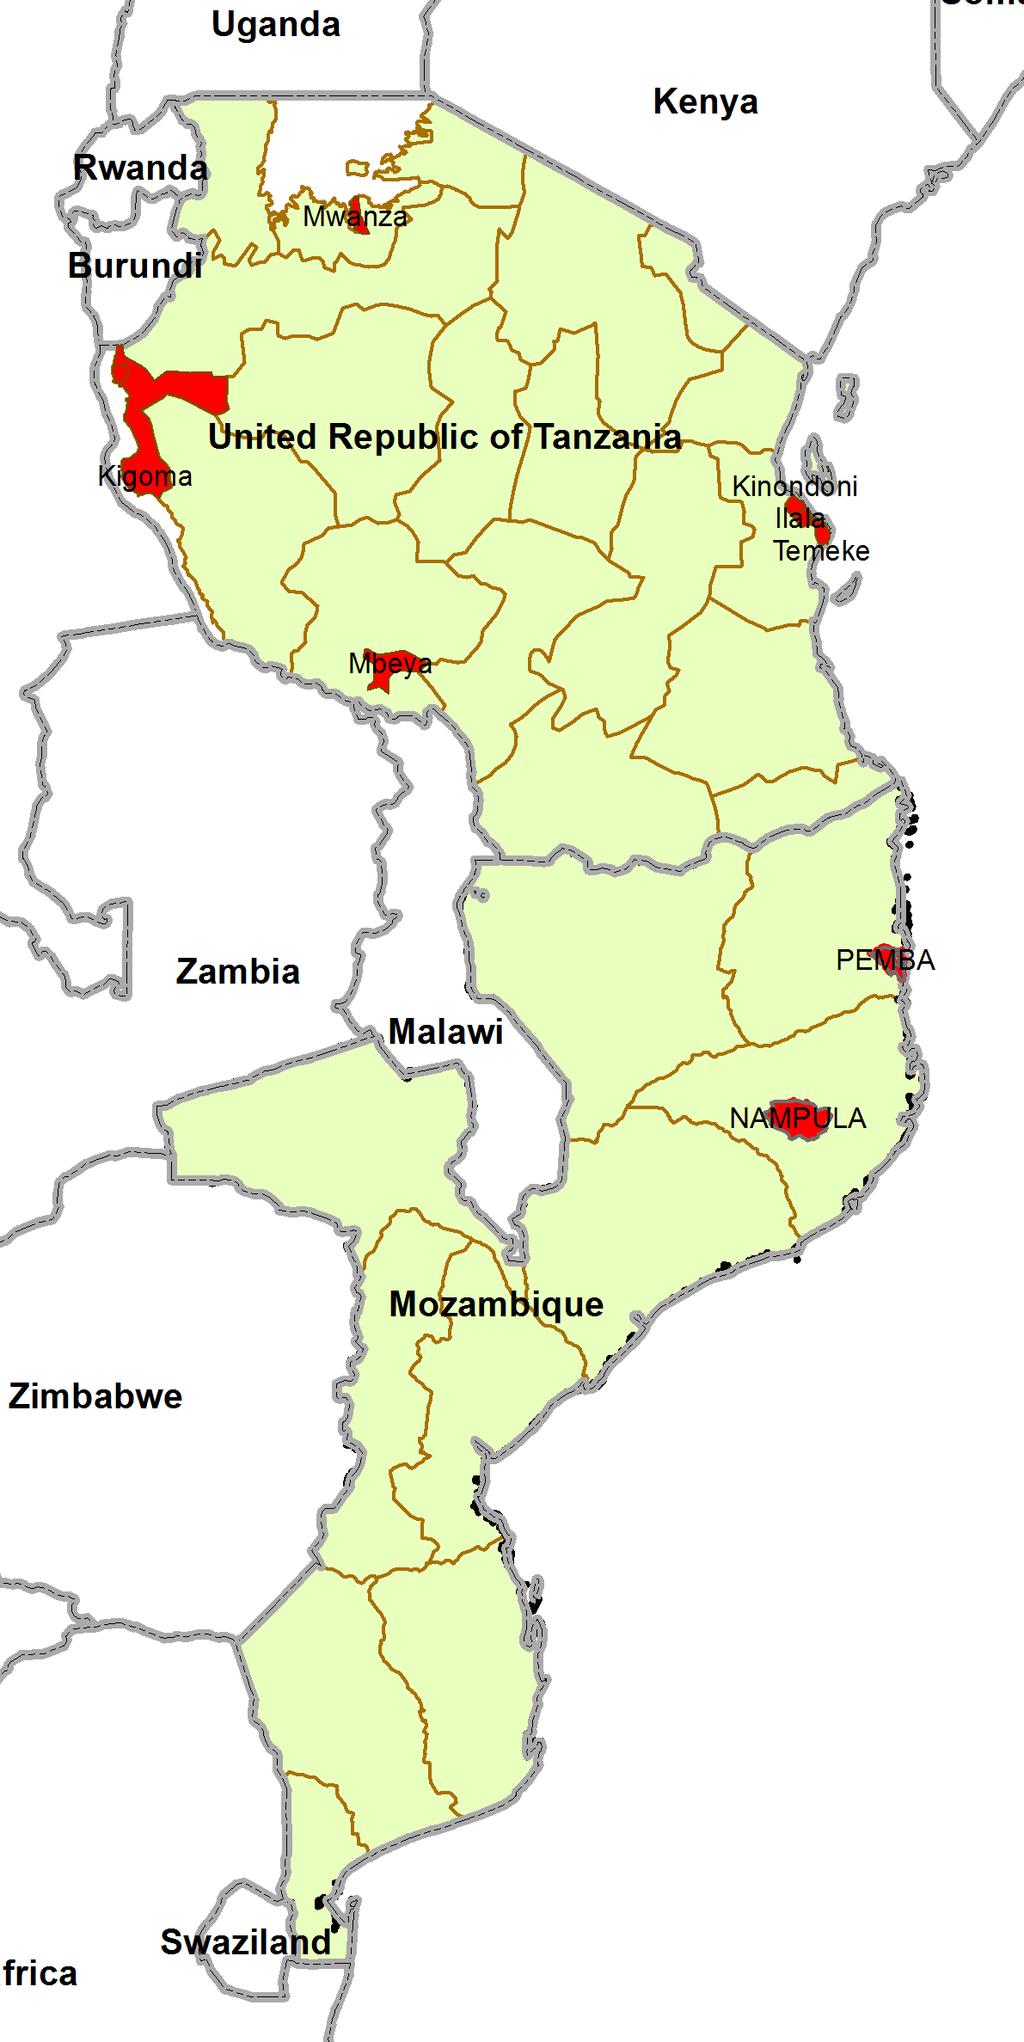 Ongoing outbreaks 1. Dengue Fever in Mozambique and Tanzania Mozambique The Ministry of Health of Mozambique informed WHO of an outbreak of dengue fever on 21 April 2014.